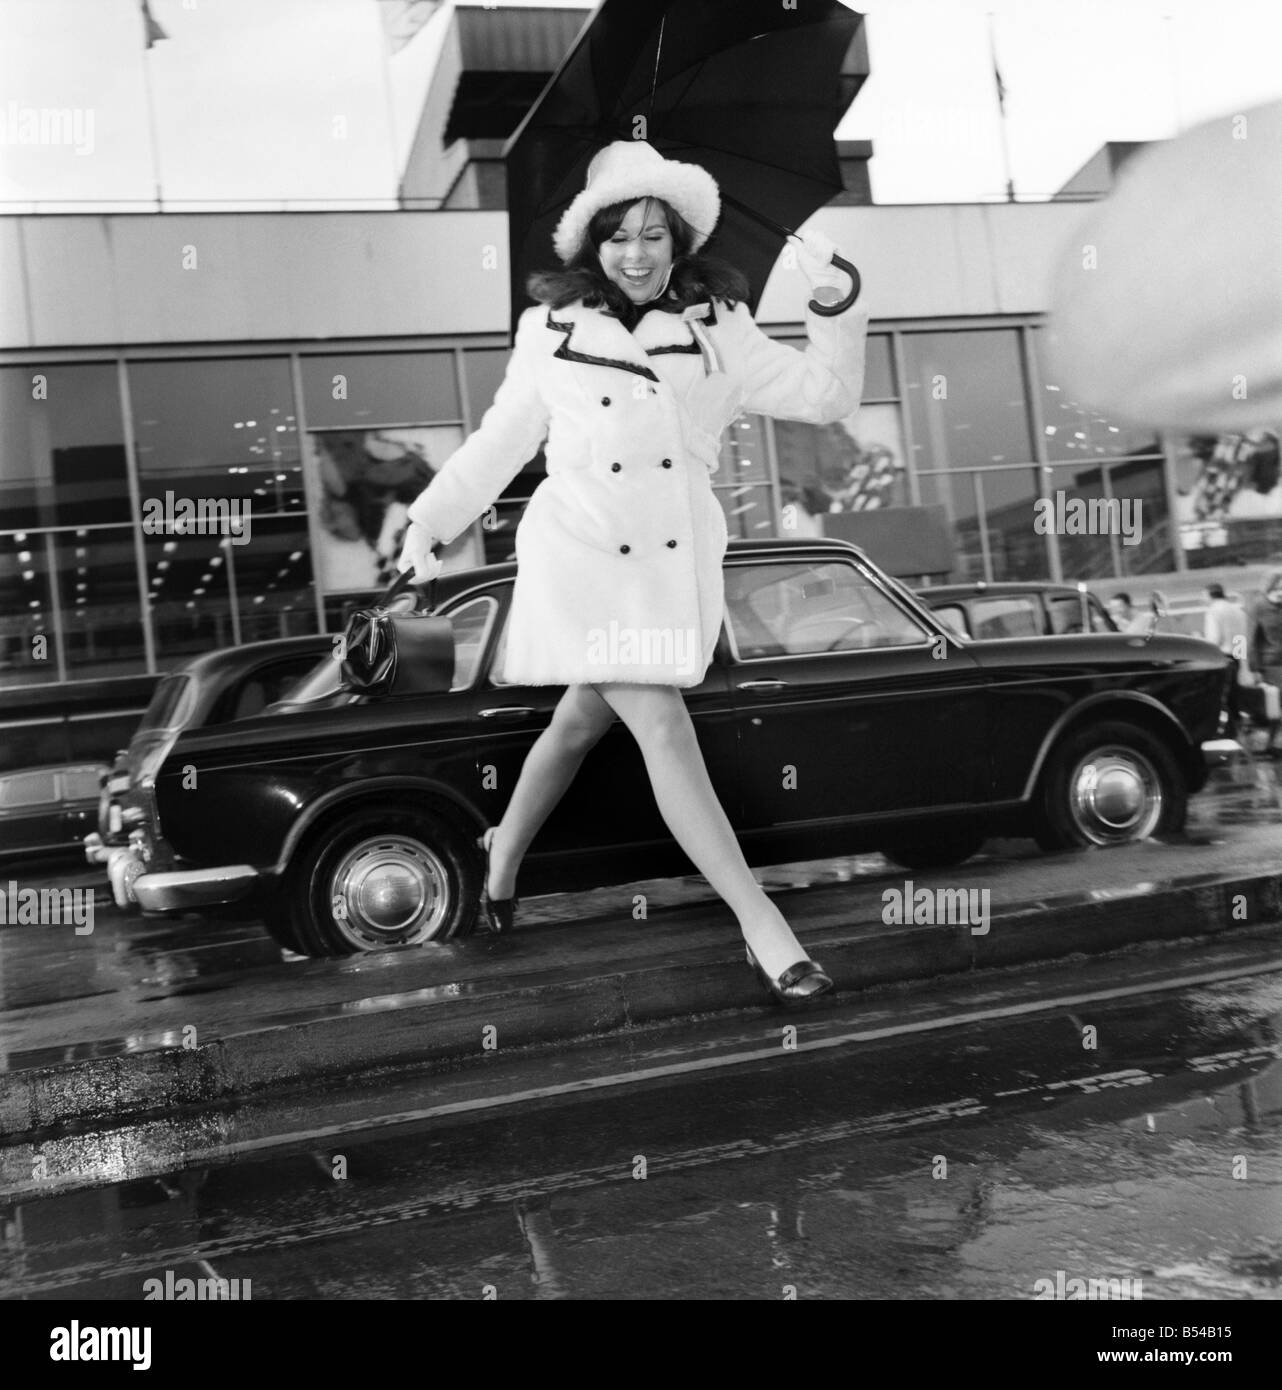 Miss Canada, 21 year old Jacqui Perring from Ontario arrived at Heathrow Airport today for the Miss World competition. ;Nov. 196 Stock Photo